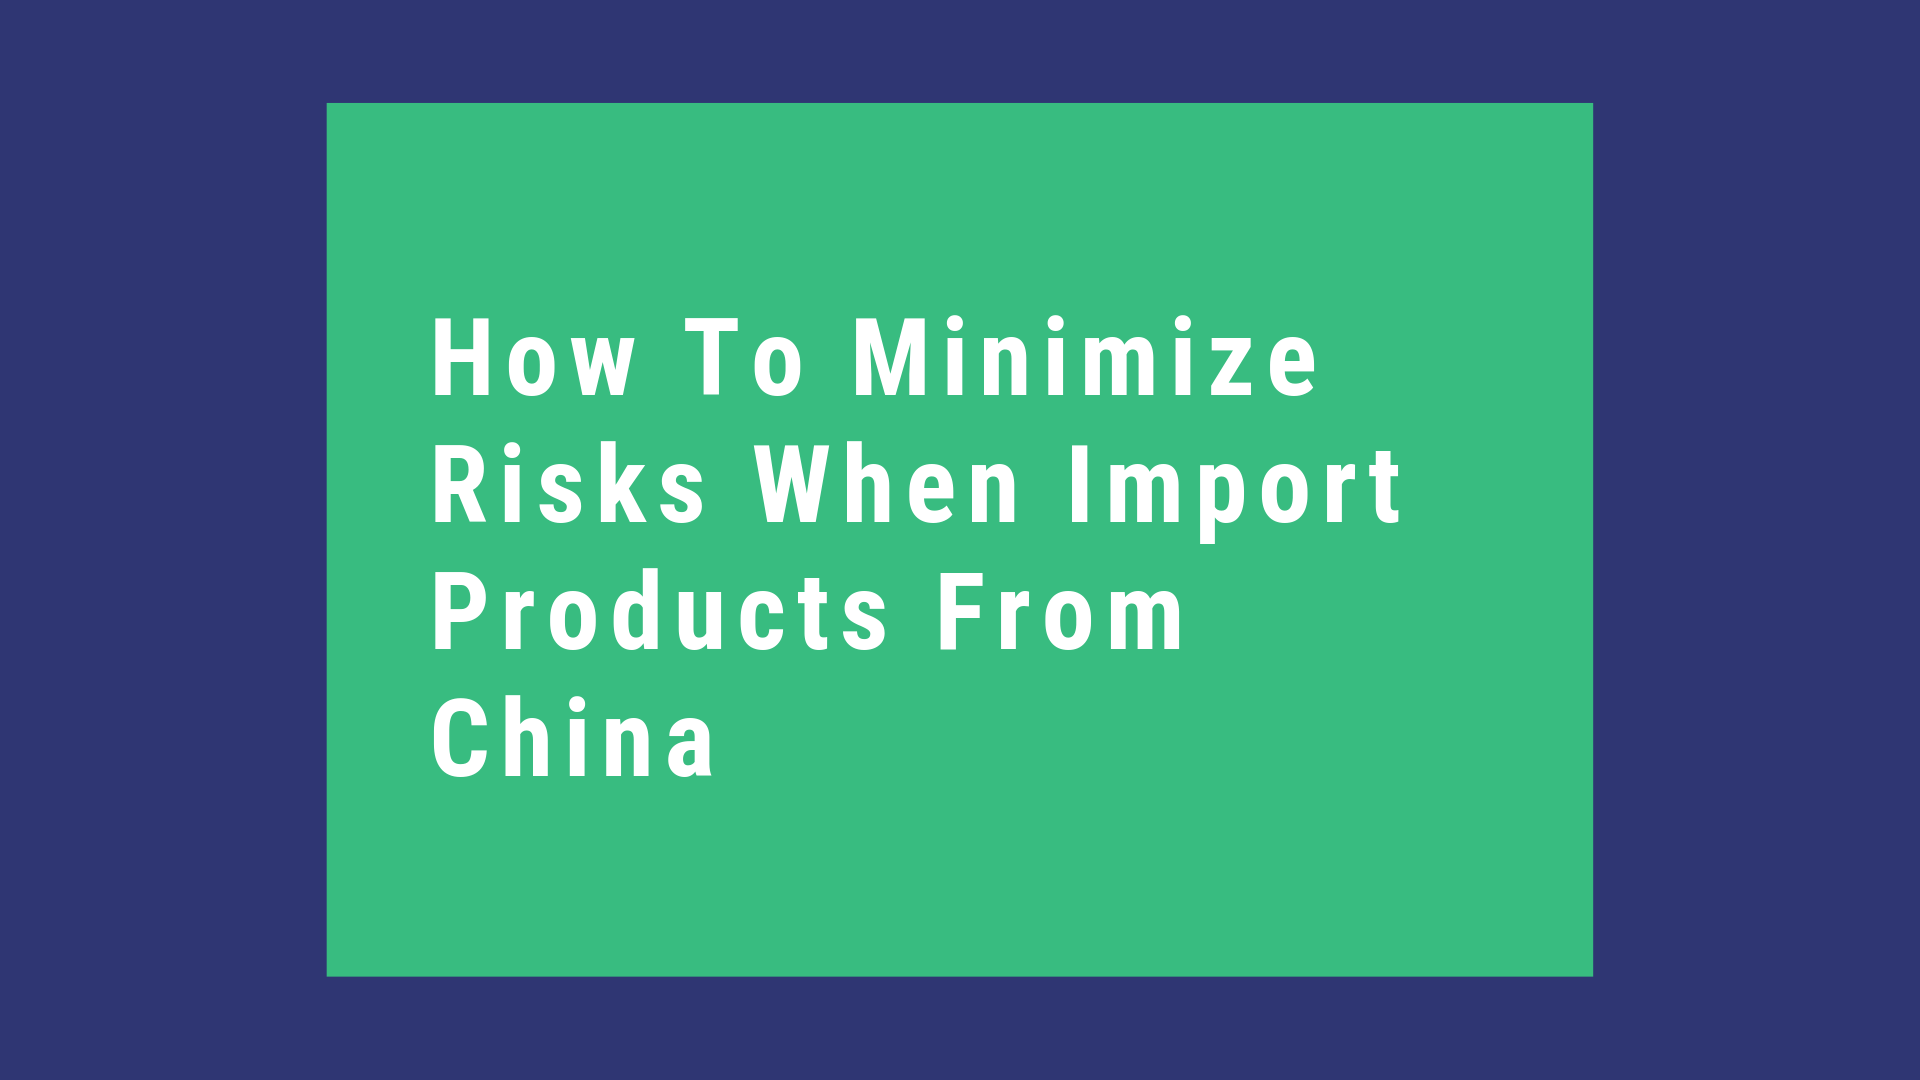 How To Minimize Risks When Import Products From China